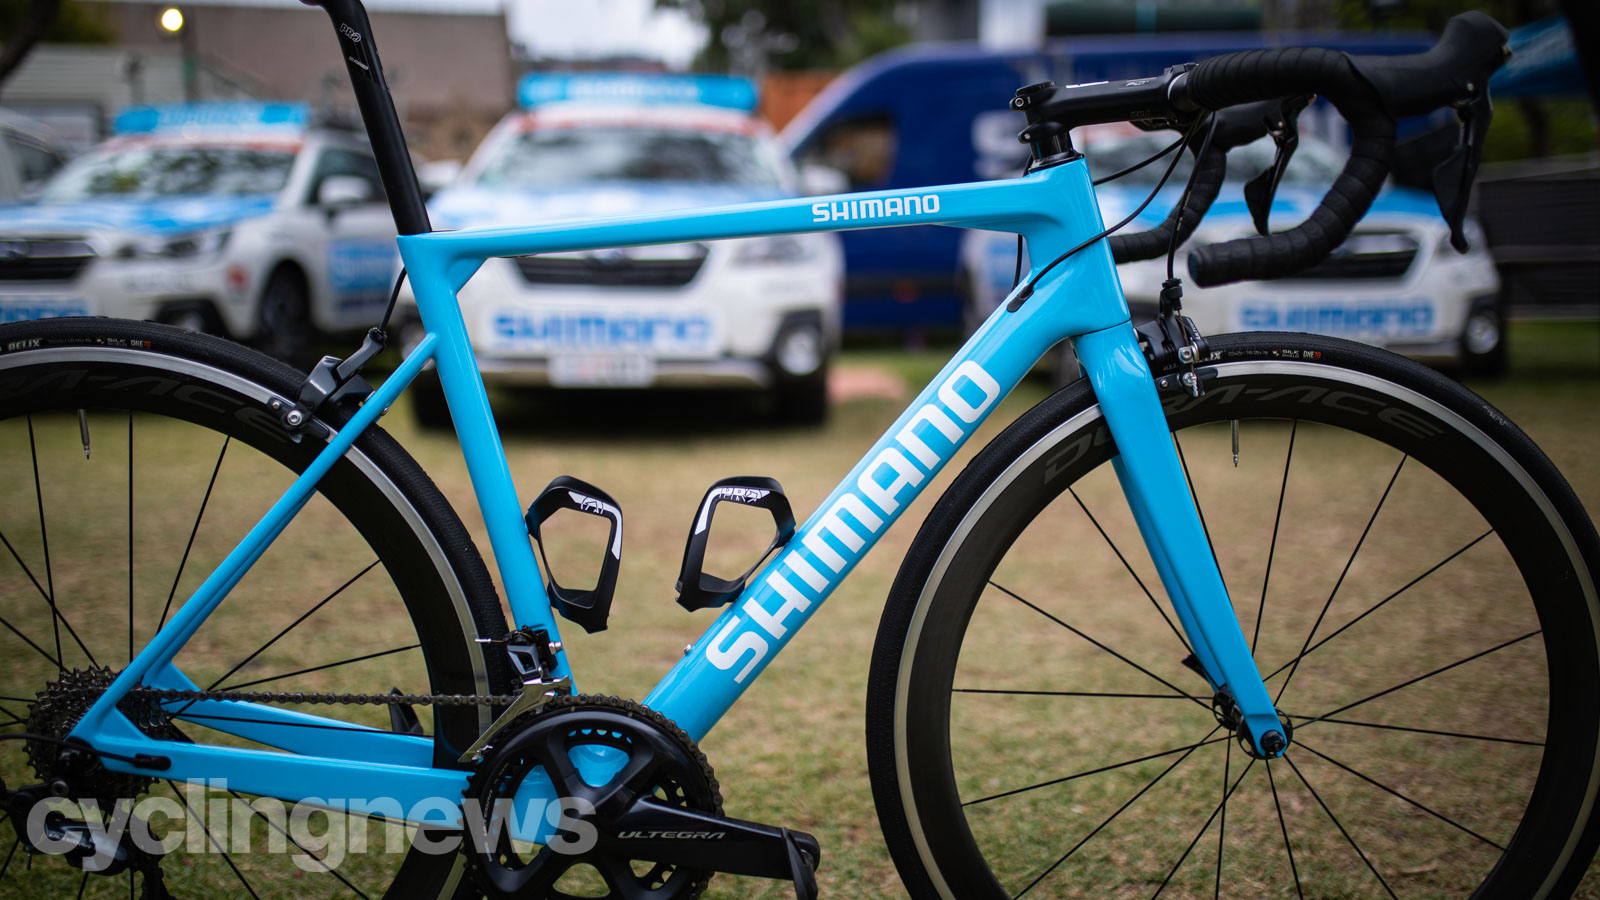 Shimano price increases REVEALED!! Should you buy now?? 